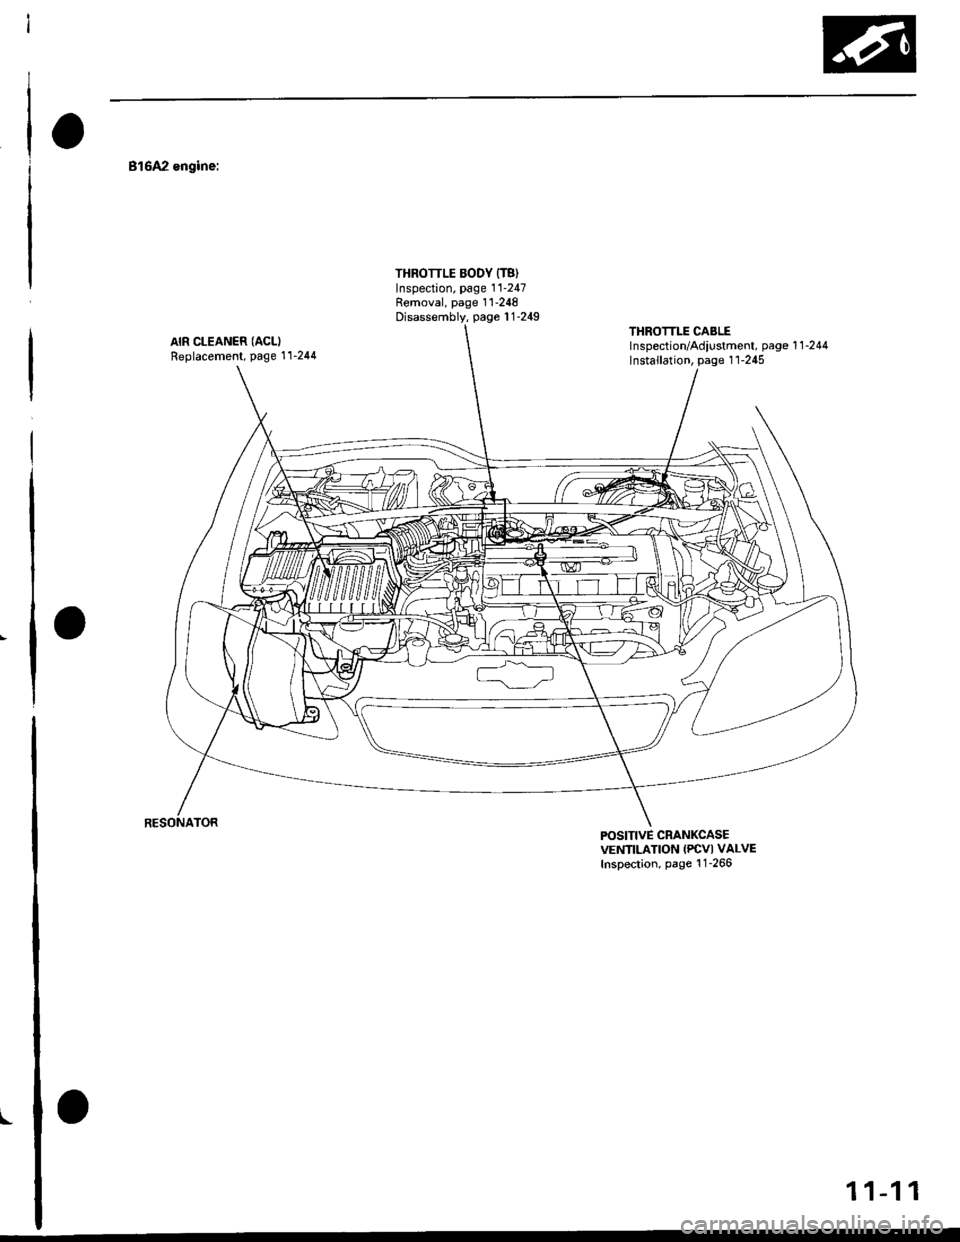 HONDA CIVIC 1996 6.G Workshop Manual \-
816A2 engine:
AIR CLEANER (ACLI
Replacement, Page 11-244
THROTTLE BODY {T8)Inspection. page 11-247Removal, page 1 1-248
Disassembly, page 1 1-249THROTTLE CABLElnspection/Adiustment, page 1 1 -244
